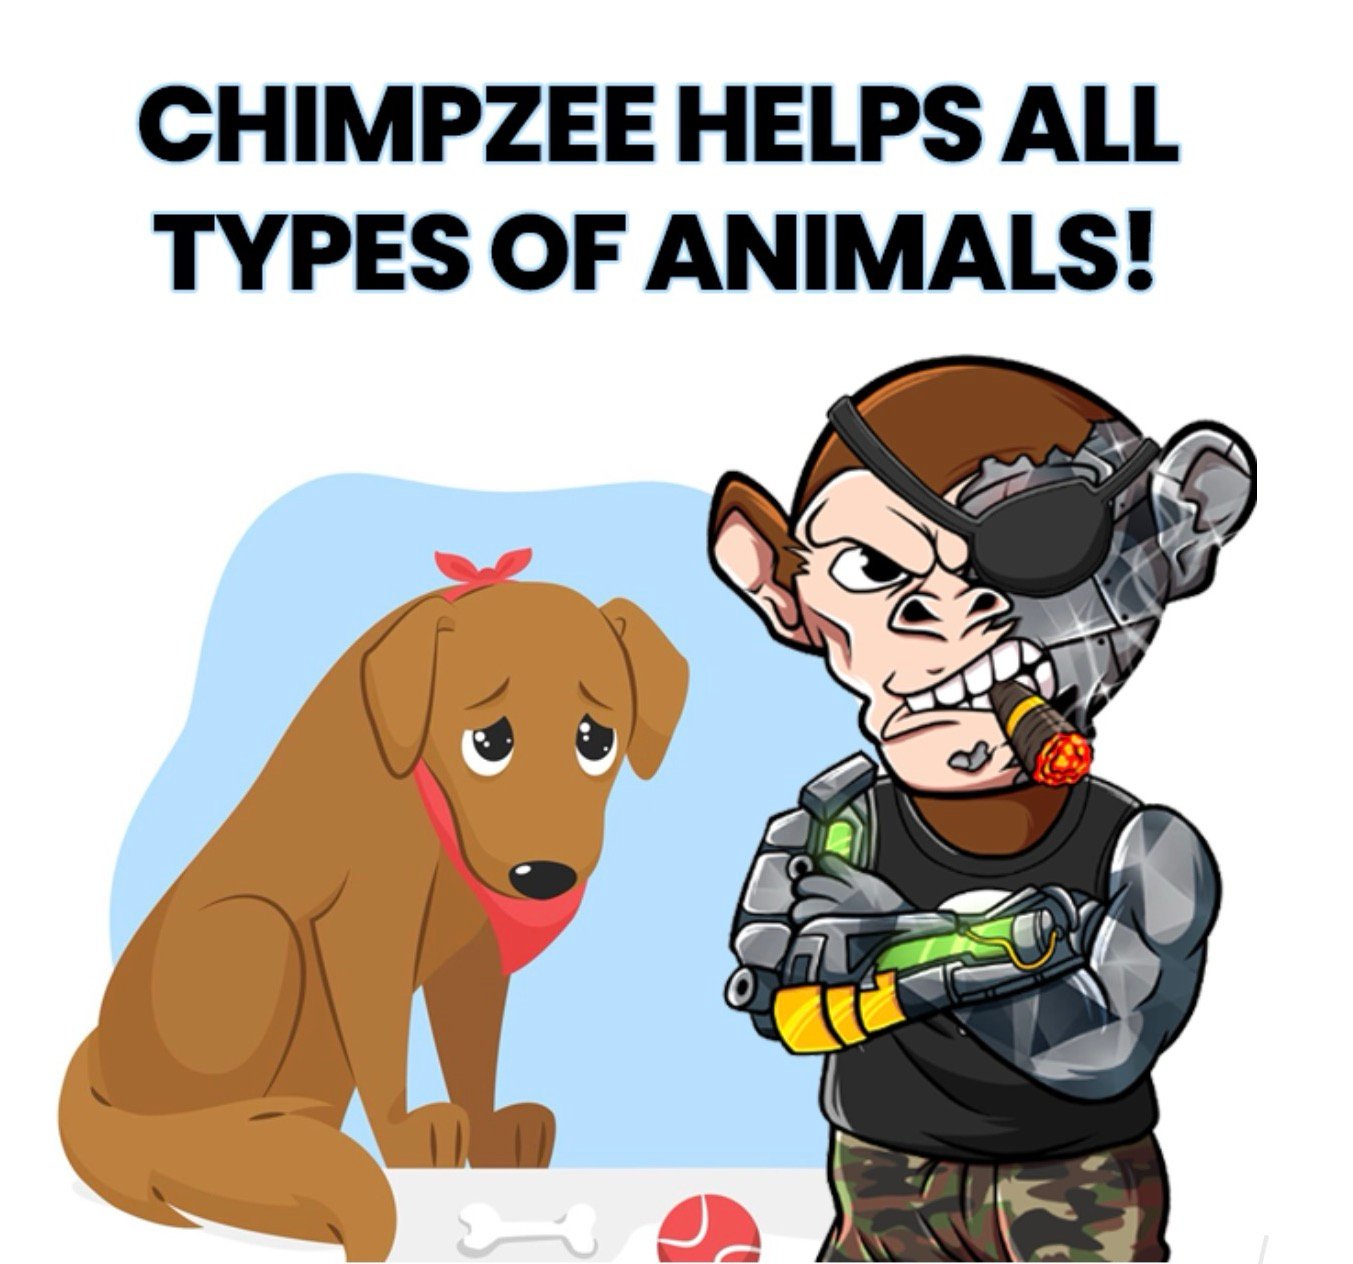 Chimpzee Meme Coin Motivates People to Join Climate Fight with Passive Income Opportunities